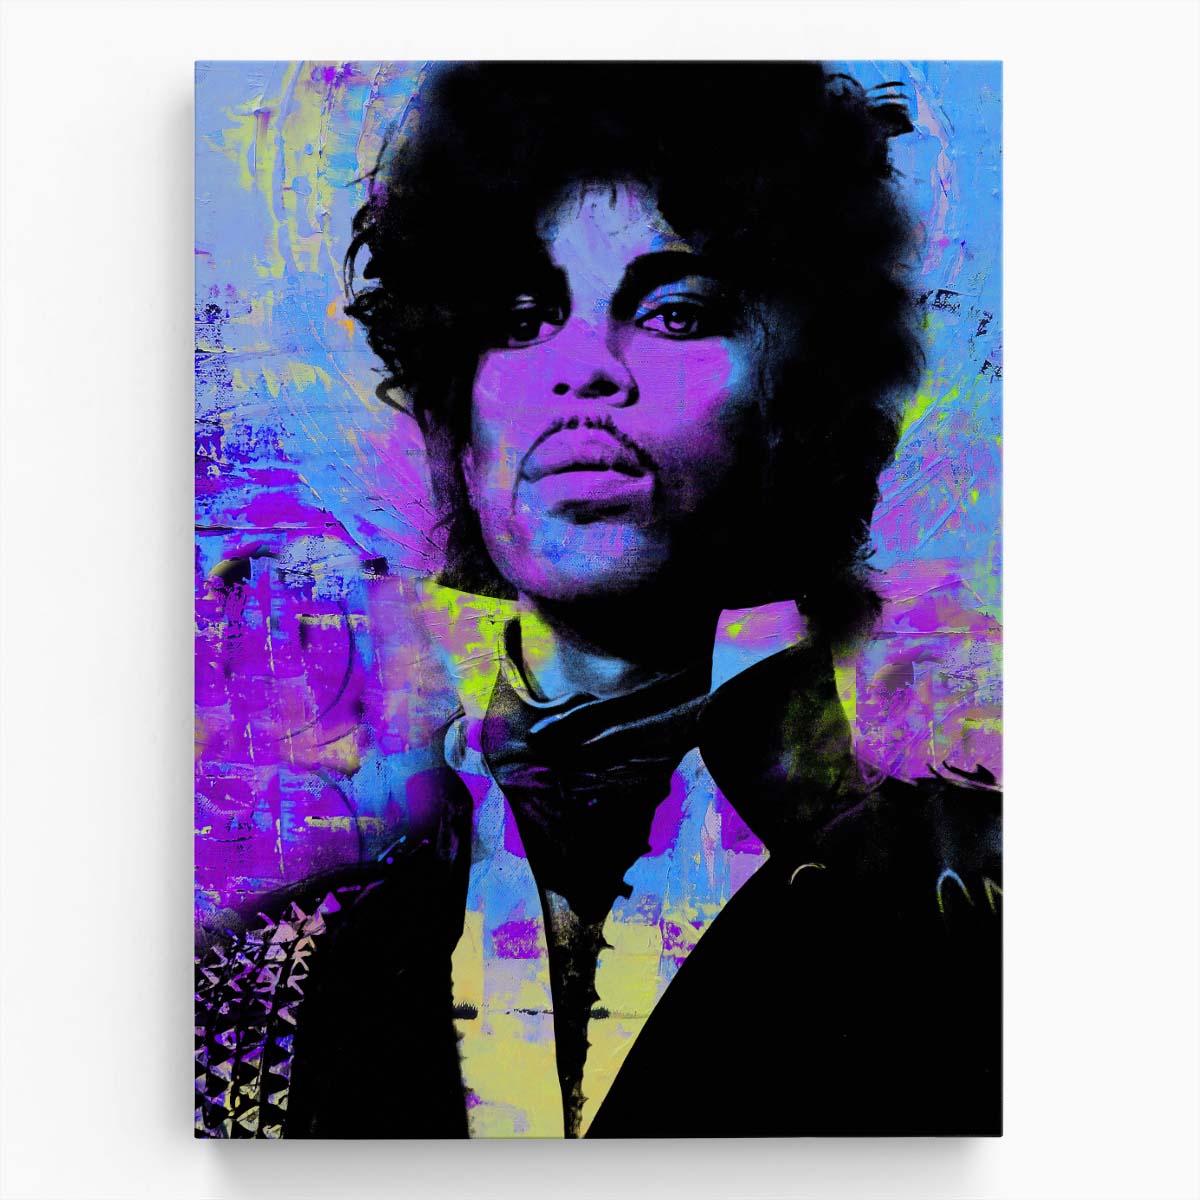 Prince Portrait Circles Graffiti Wall Art by Luxuriance Designs. Made in USA.